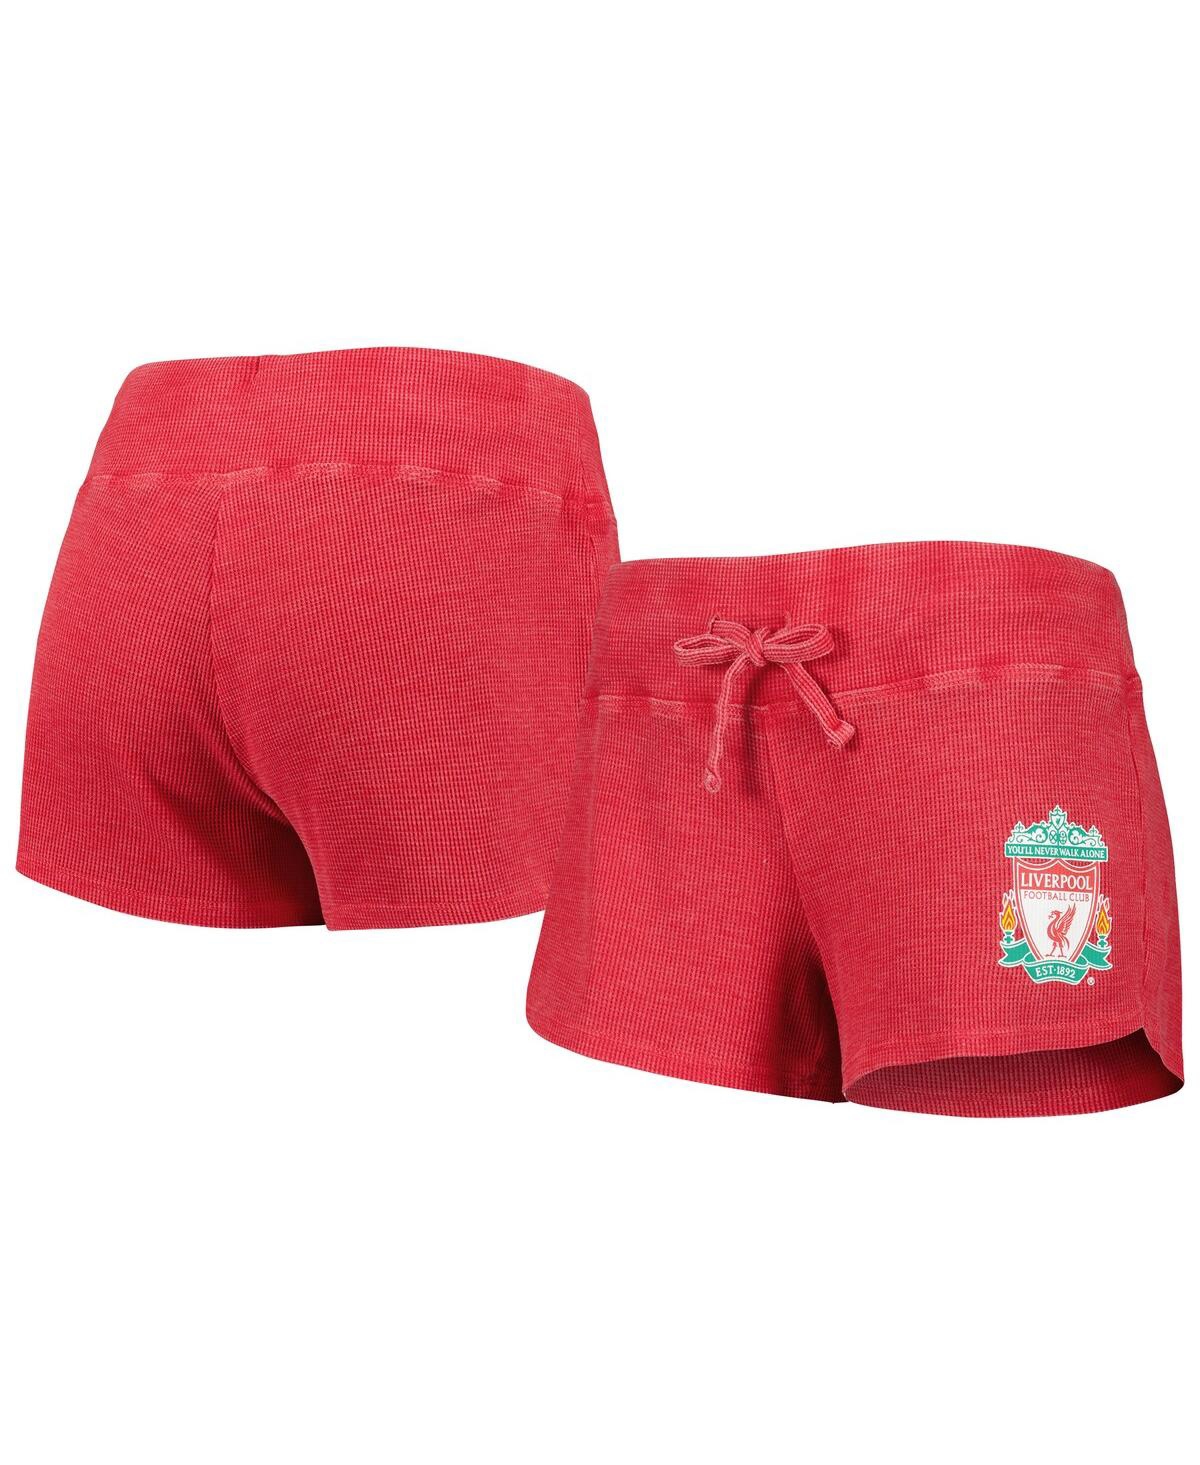 CONCEPTS SPORT WOMEN'S CONCEPTS SPORT RED LIVERPOOL RESURGENCE SHORTS